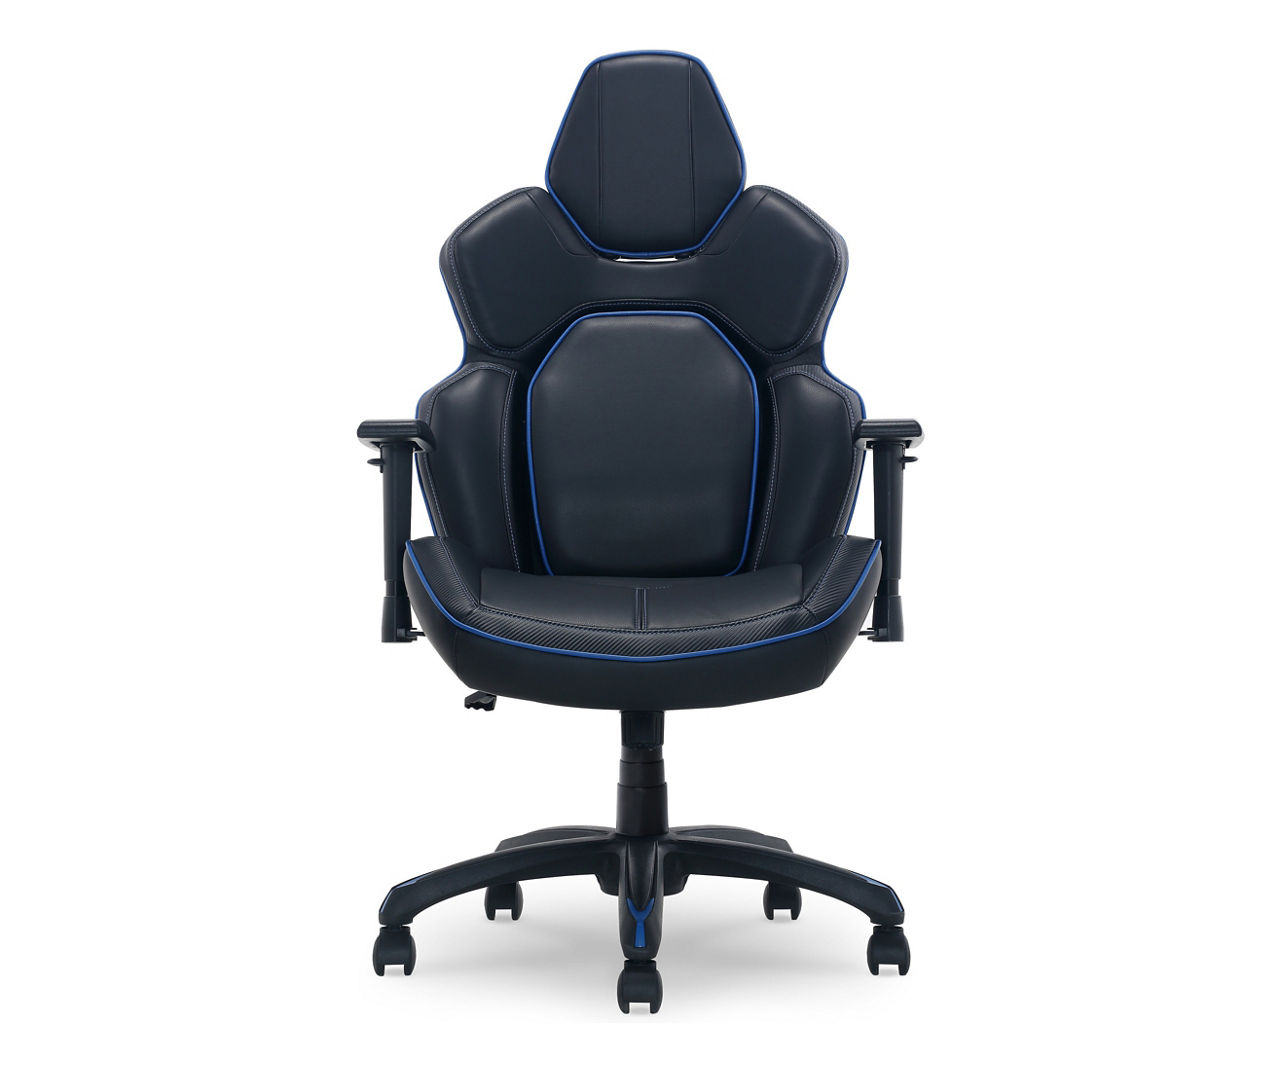 3D Incite Blue Vegan Leather Gaming Chair